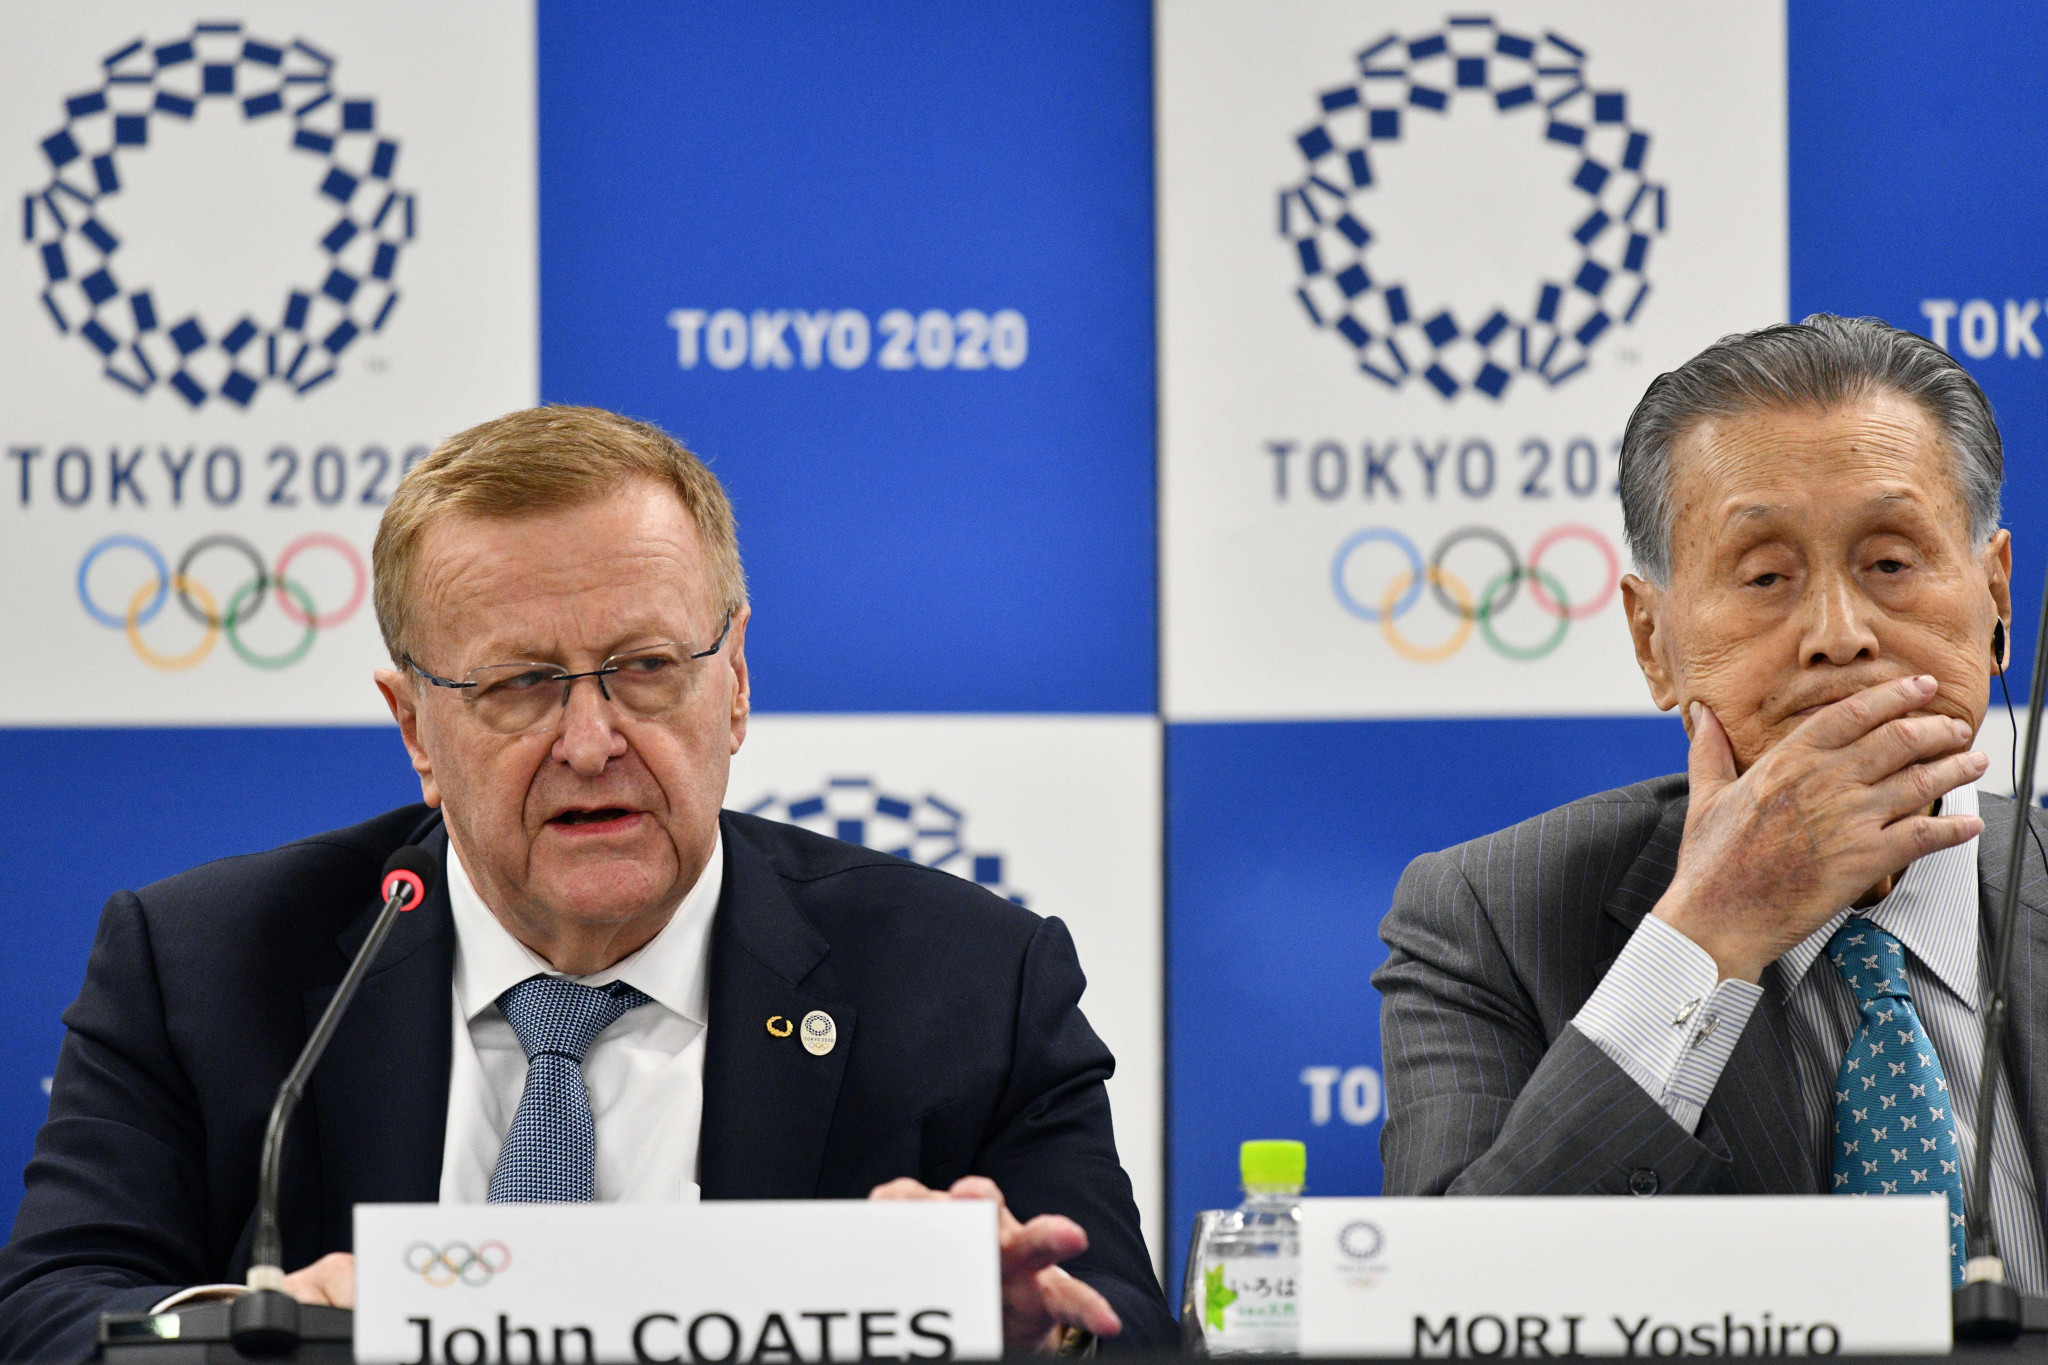 John Coates has claimed the IOC are working with federations to develop a July and August window next year ©Getty Images